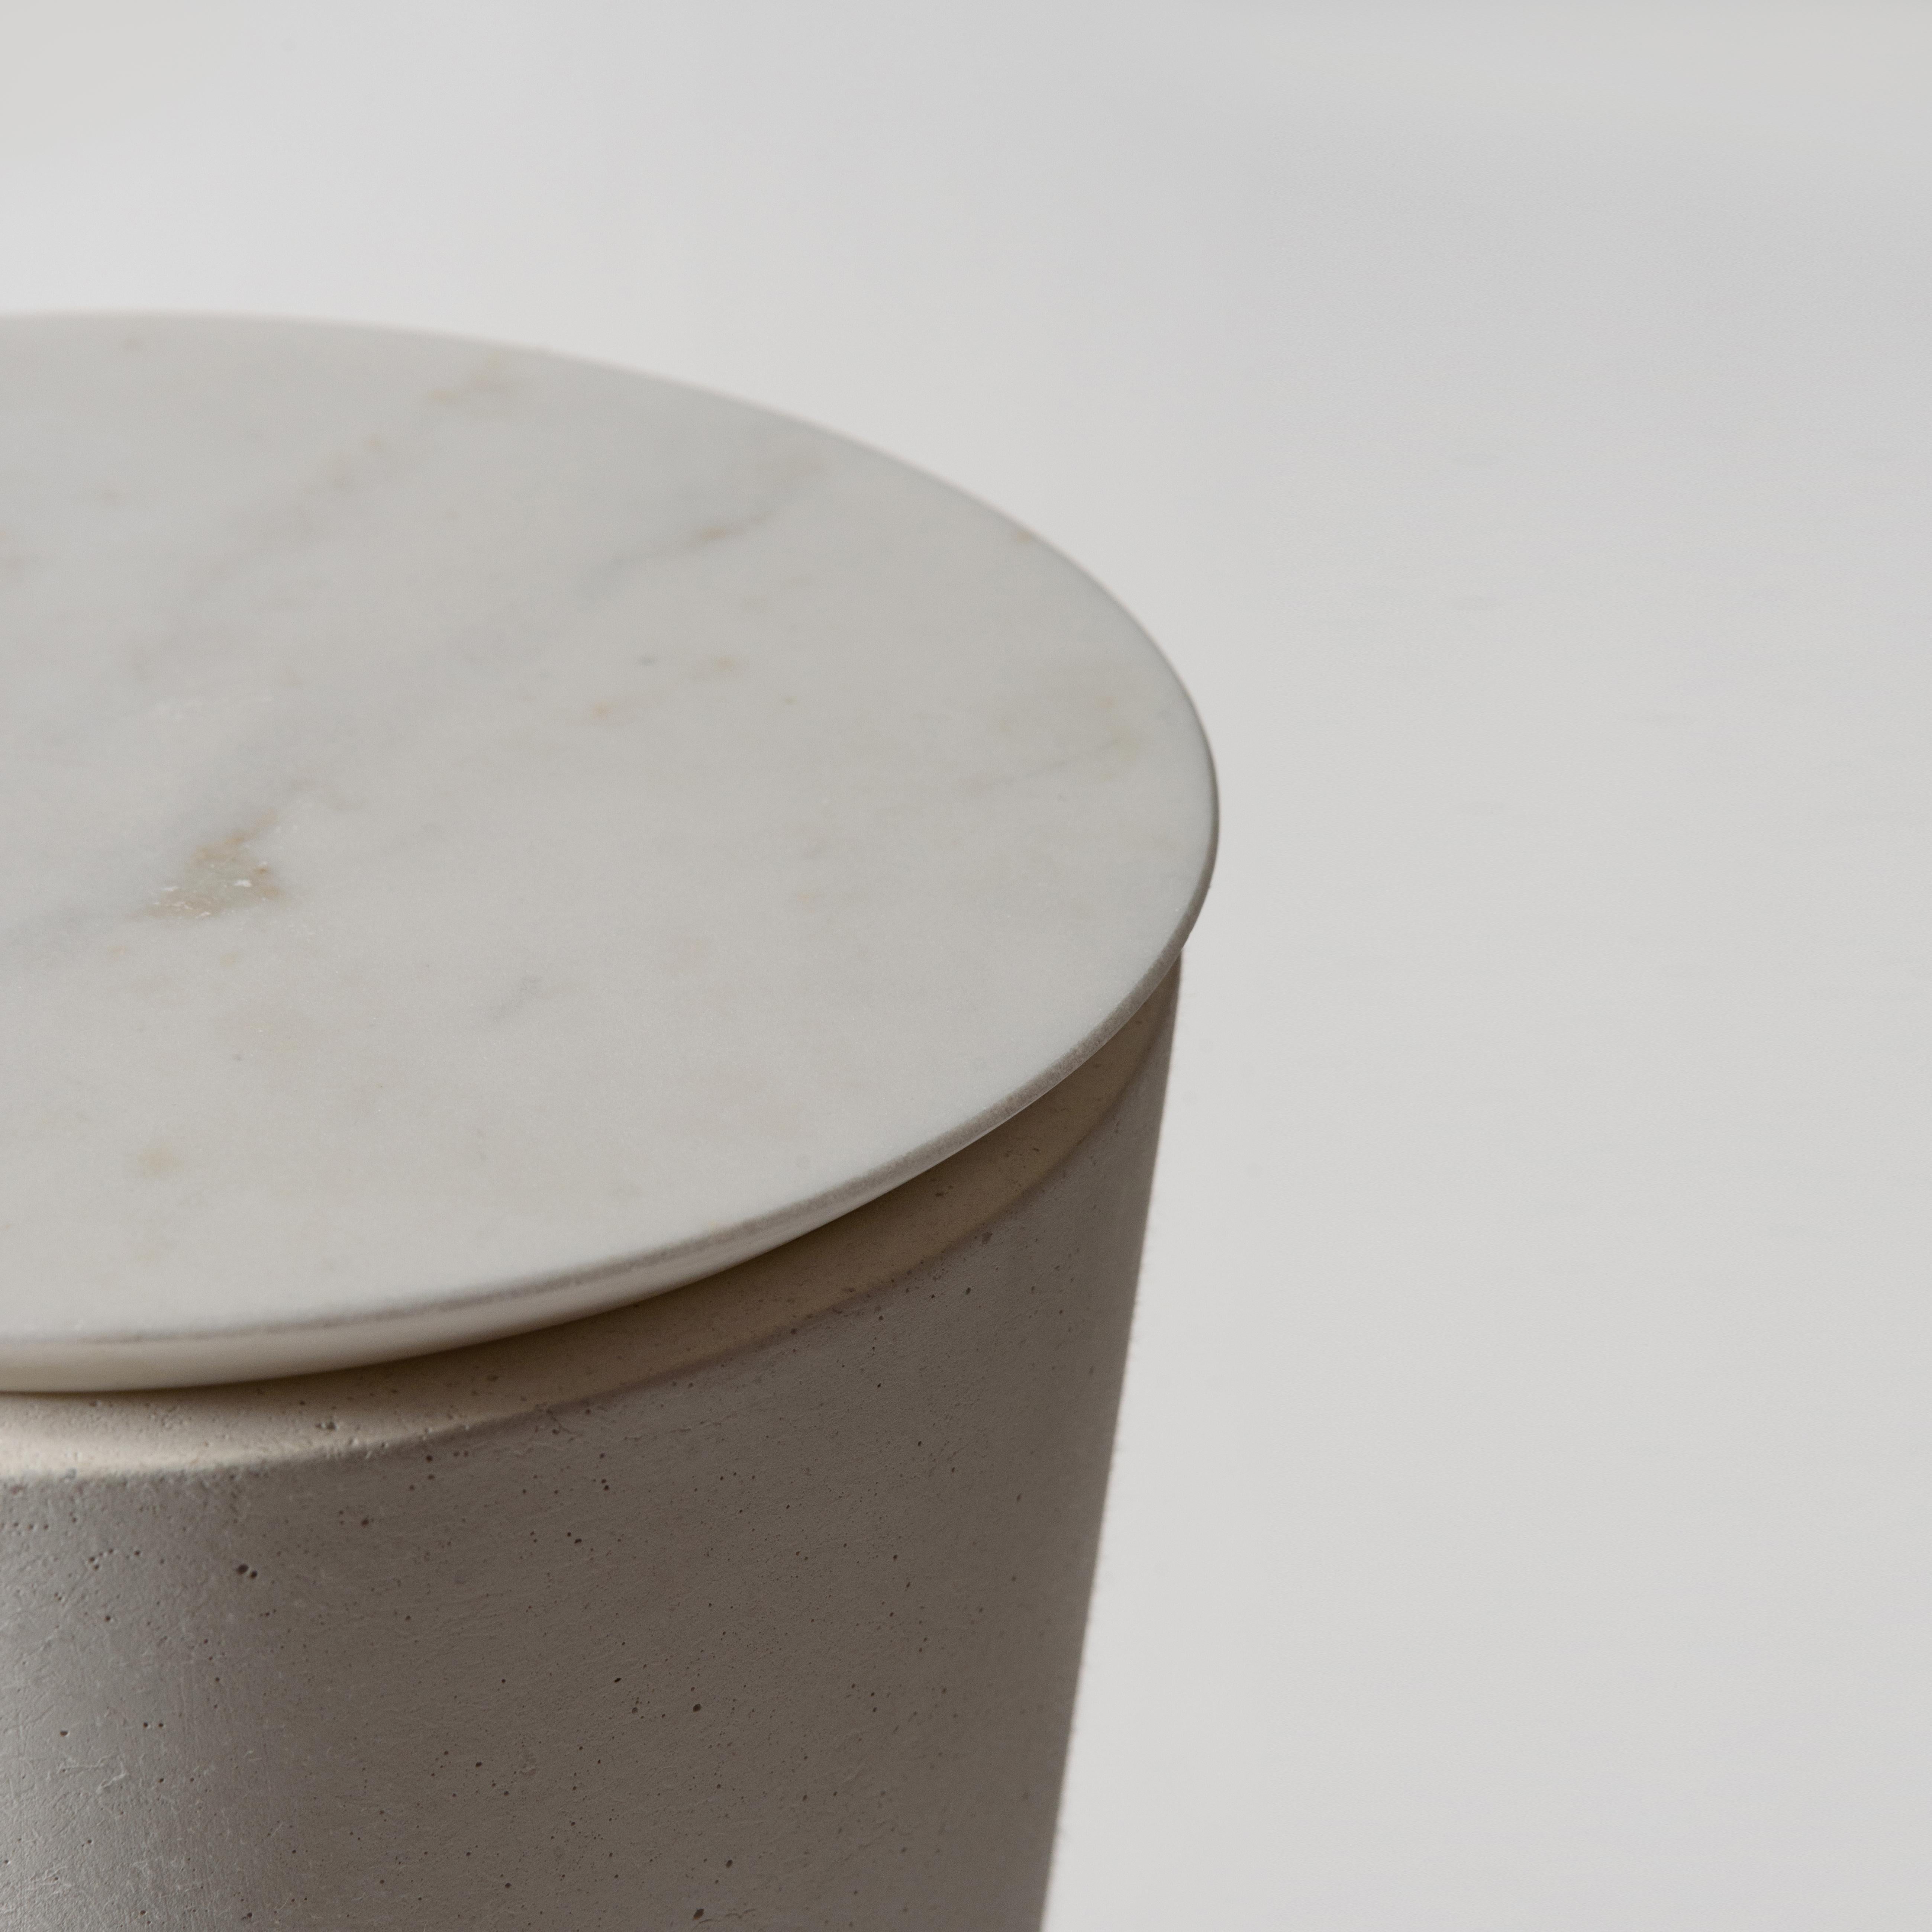 European 21st century sculptural handmade concrete, marble & stone 'PLINTH MARBLE' Table in White Handmade by Alentes.

The PLINTH MARBLE side table is both sculptural and functional, a friendly eclectic touch in any space. Its form resembles a thin